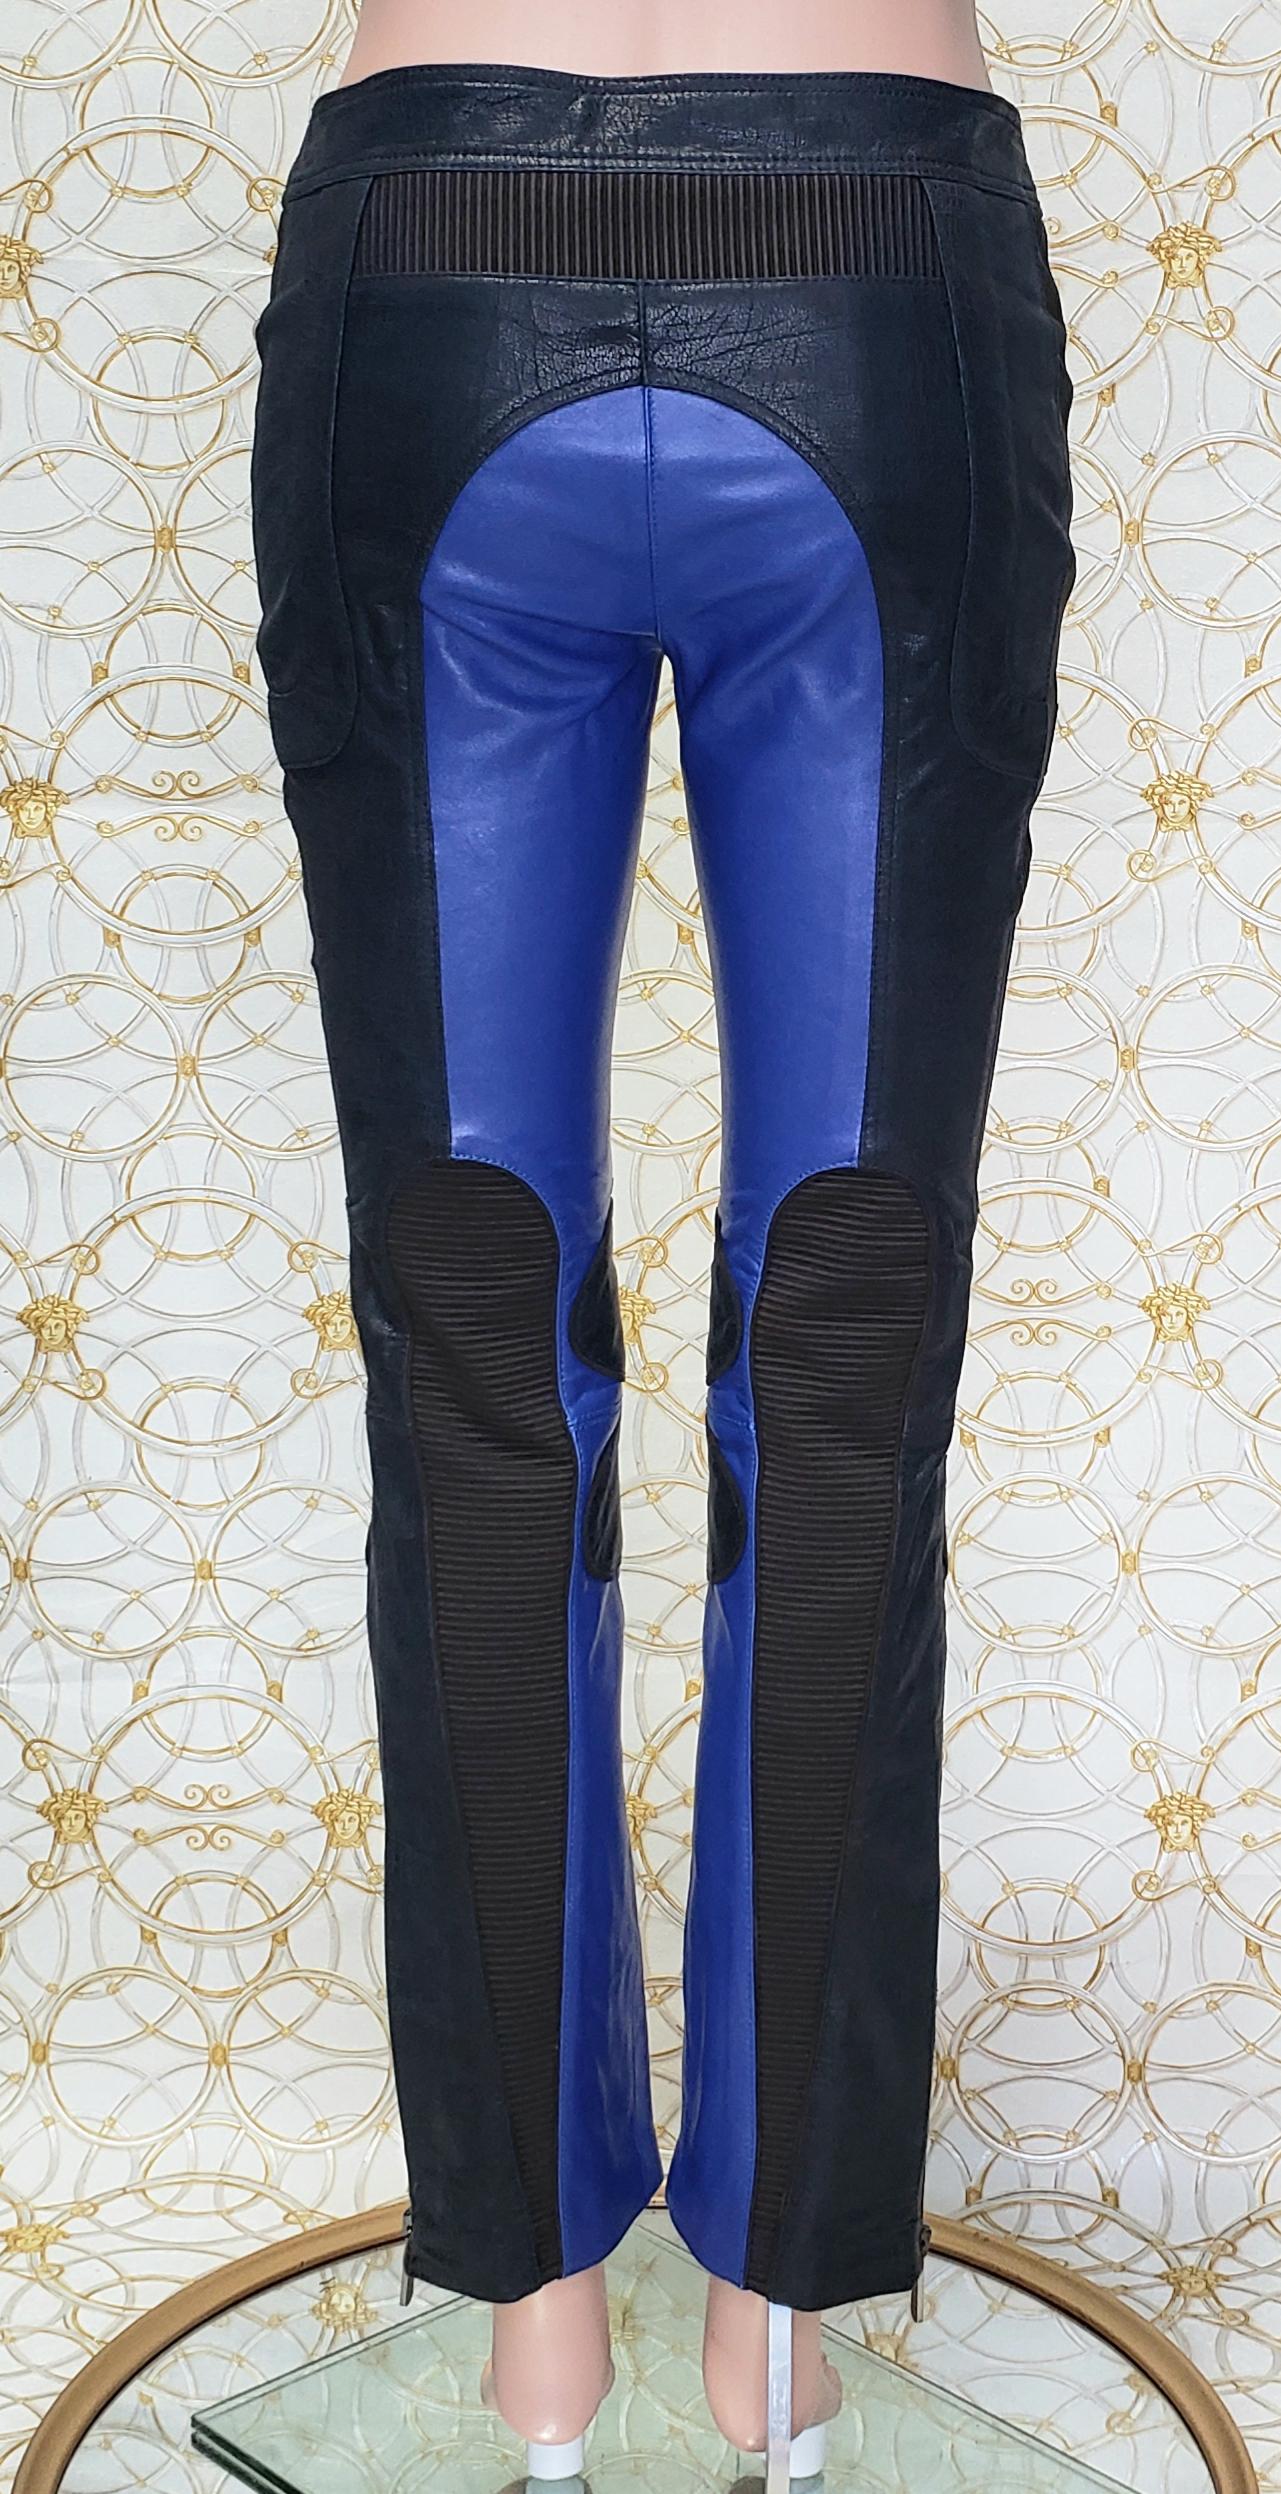 Blue F/W 2010 L #13 VERSACE BLUE and NAVY BLUE MOTORCYCLE LEATHER PANTS size 38 - 2 For Sale